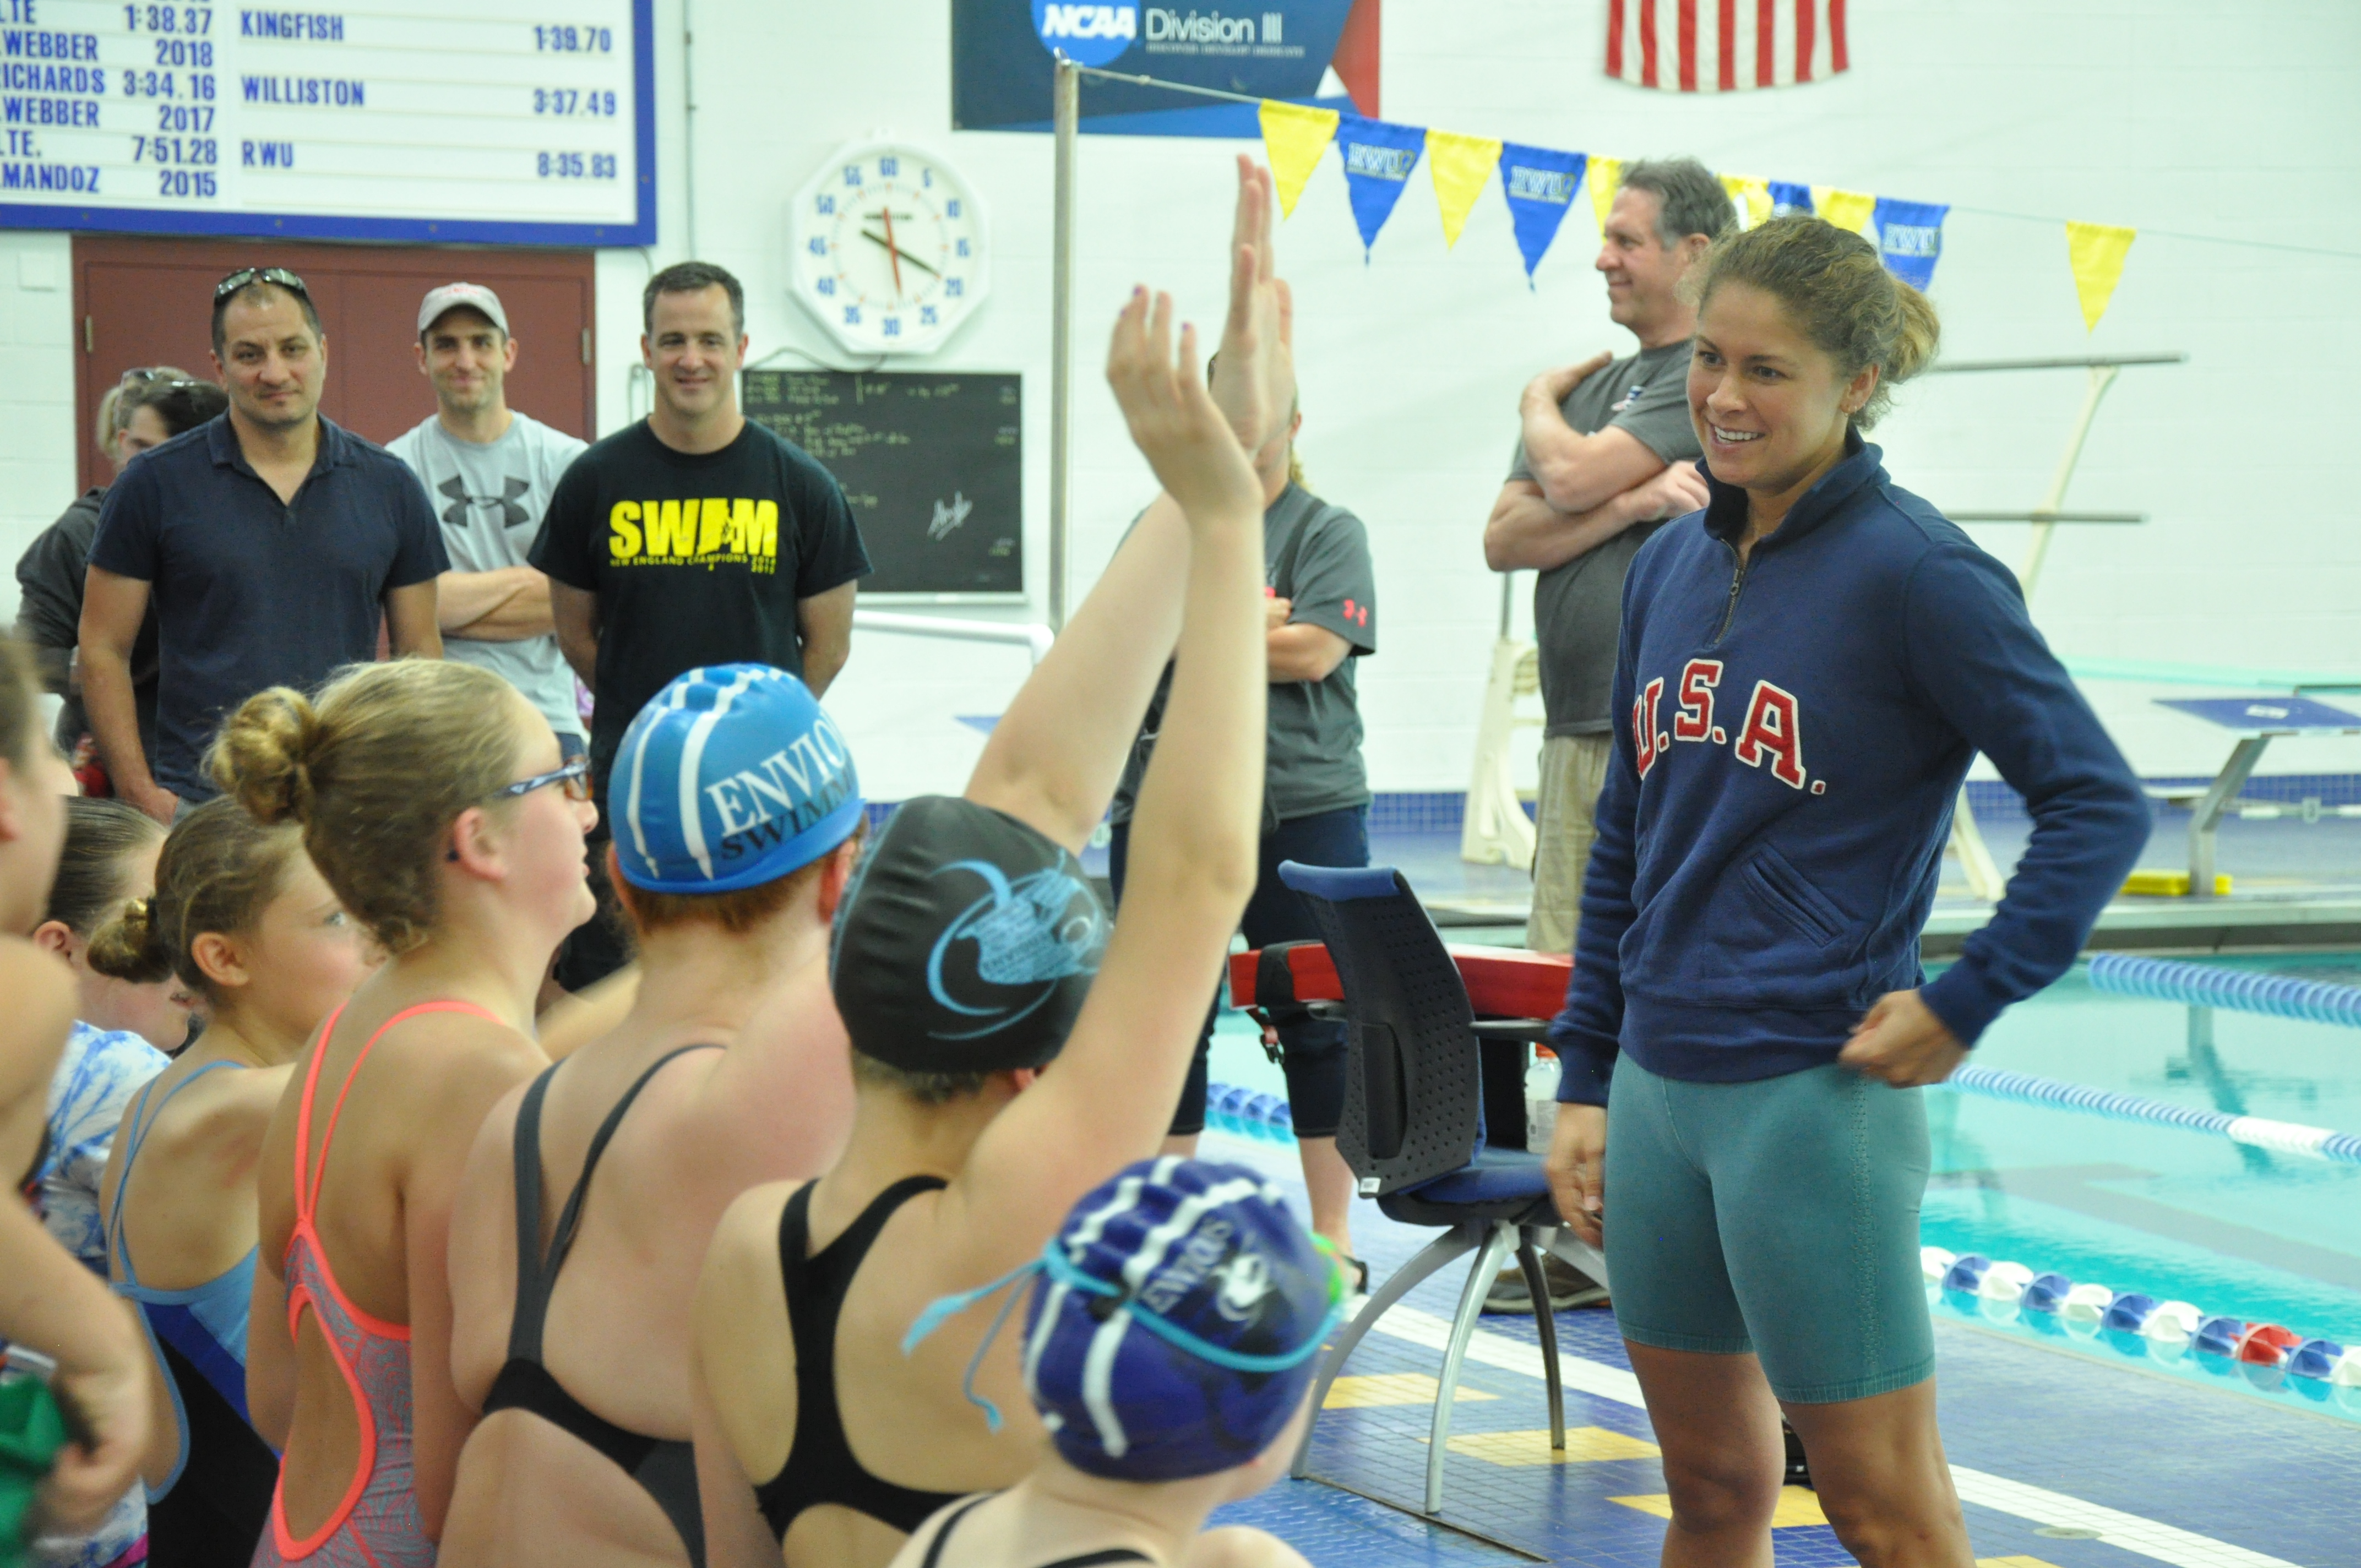 A group of young swimmers face away from the camera, raising hands. Olympic swimmer Elizabeth Beisel stands smiling before them, taking questions, wearing a blue 